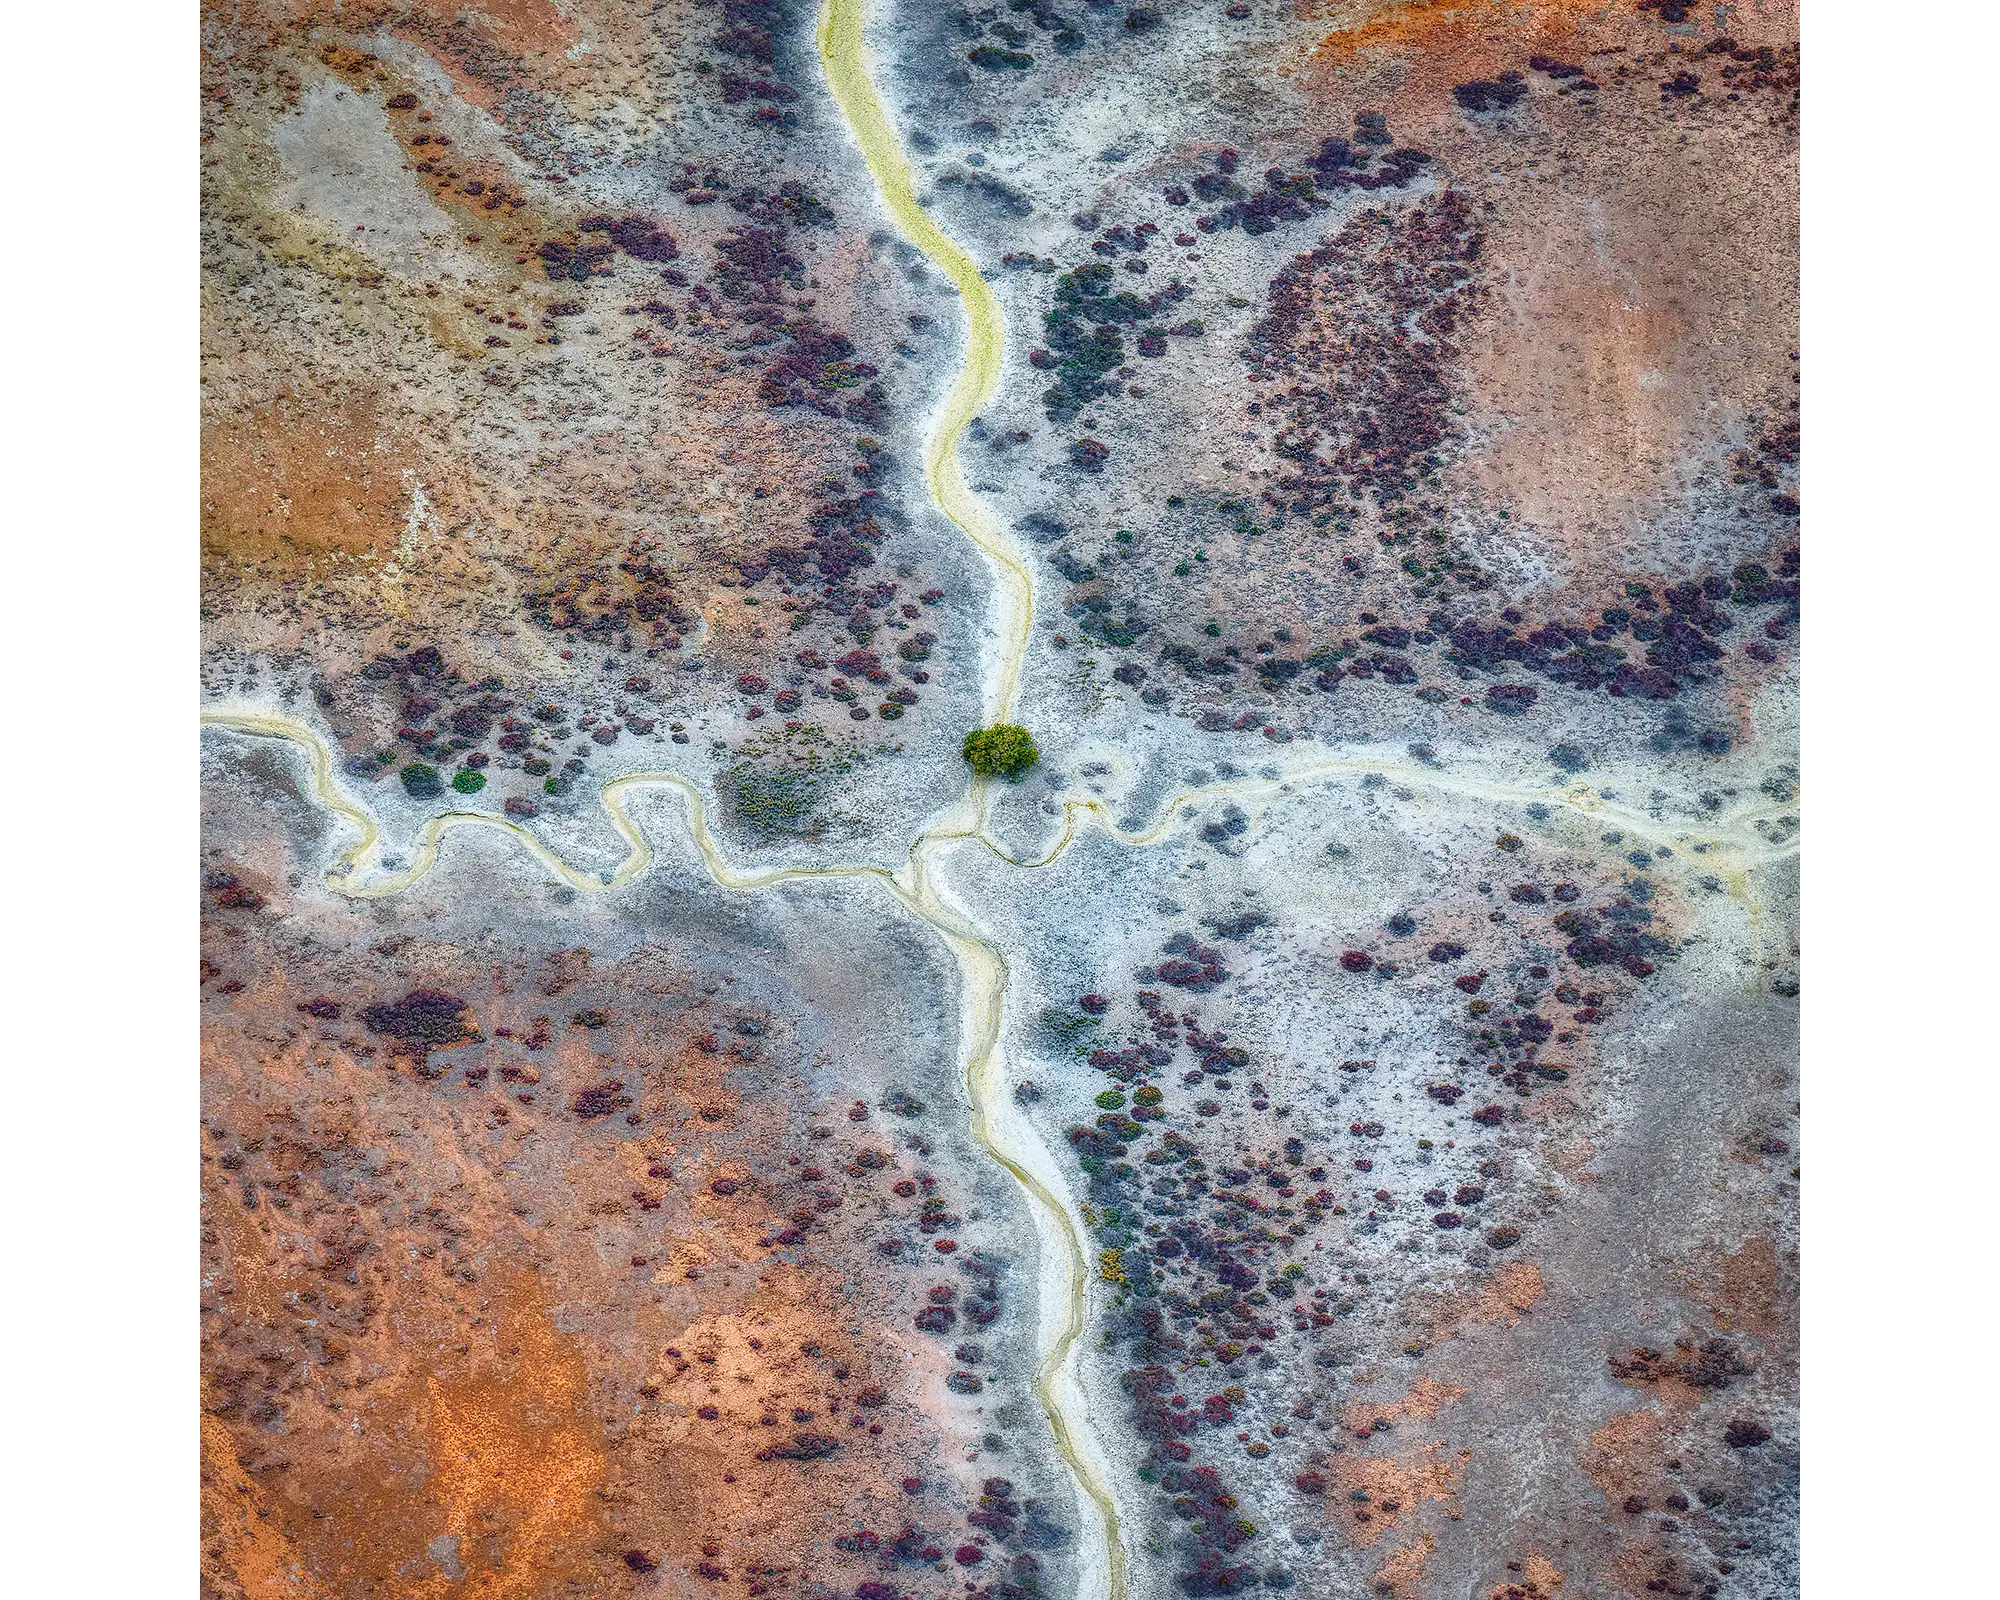 Abstract patterns in Roebuck Plains, The Kimberley, Western Australia.